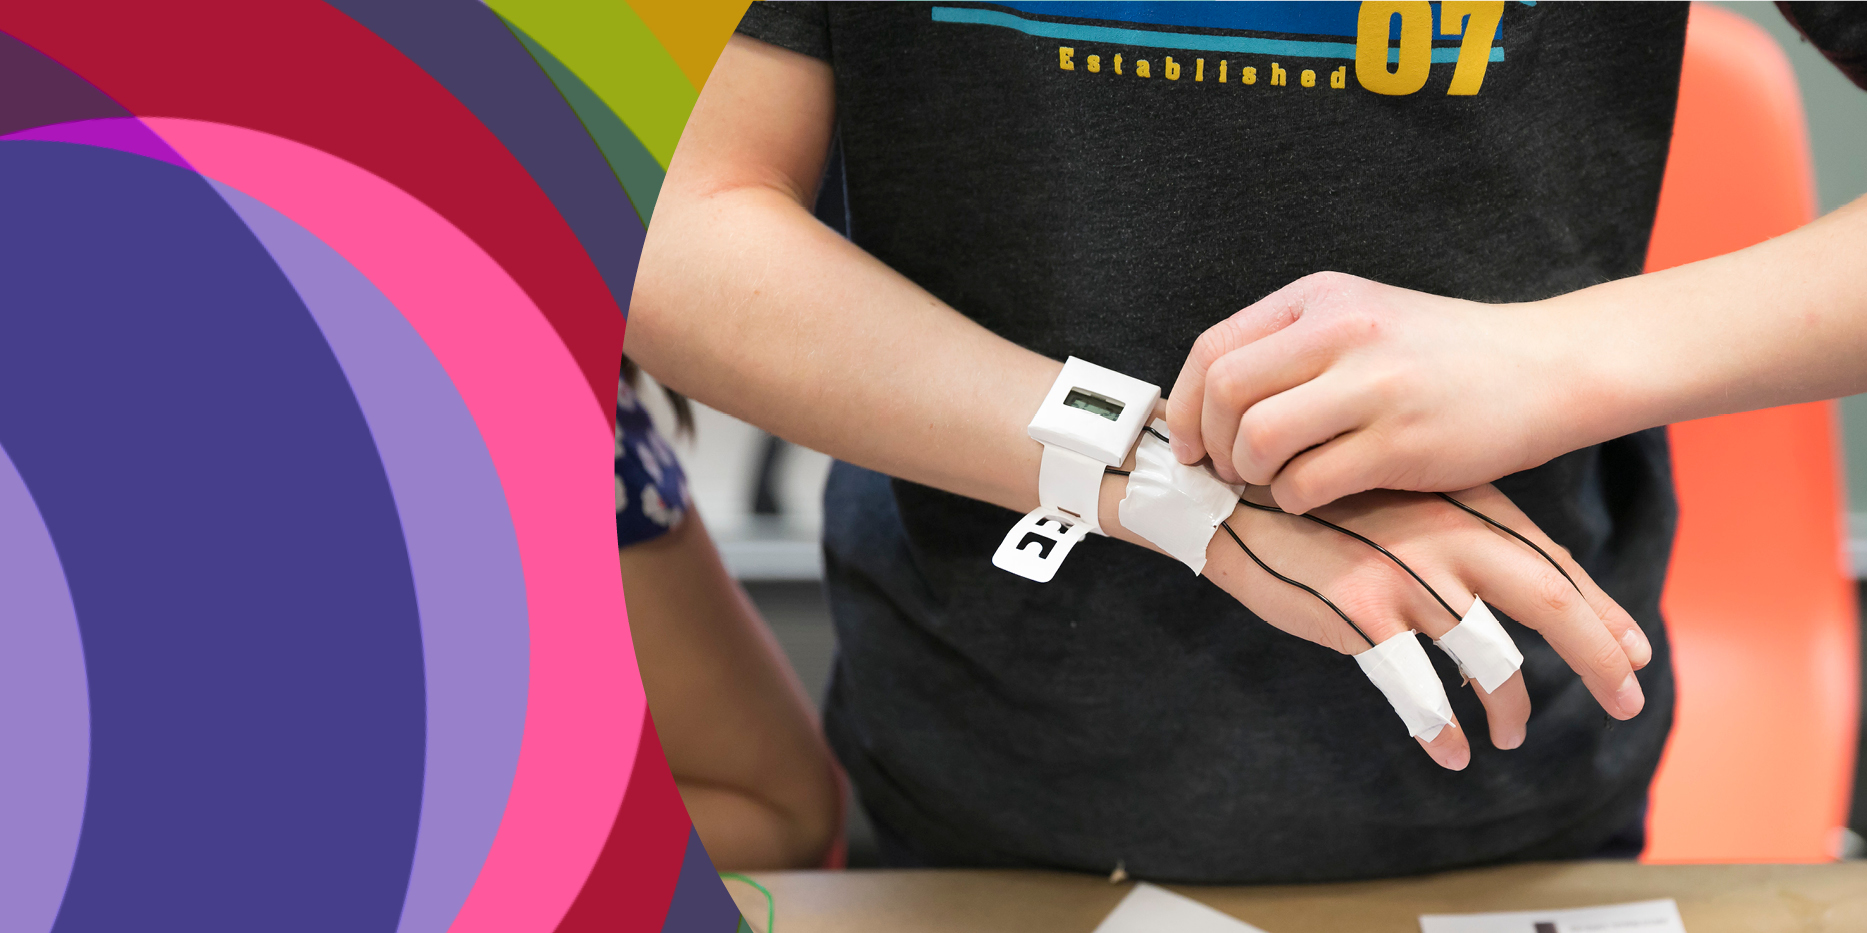 This image shows colorful, circular design elements on the left-hand border. In the center and left-hand side, the image shows a child's hands as they construct a watch on their right wrist.